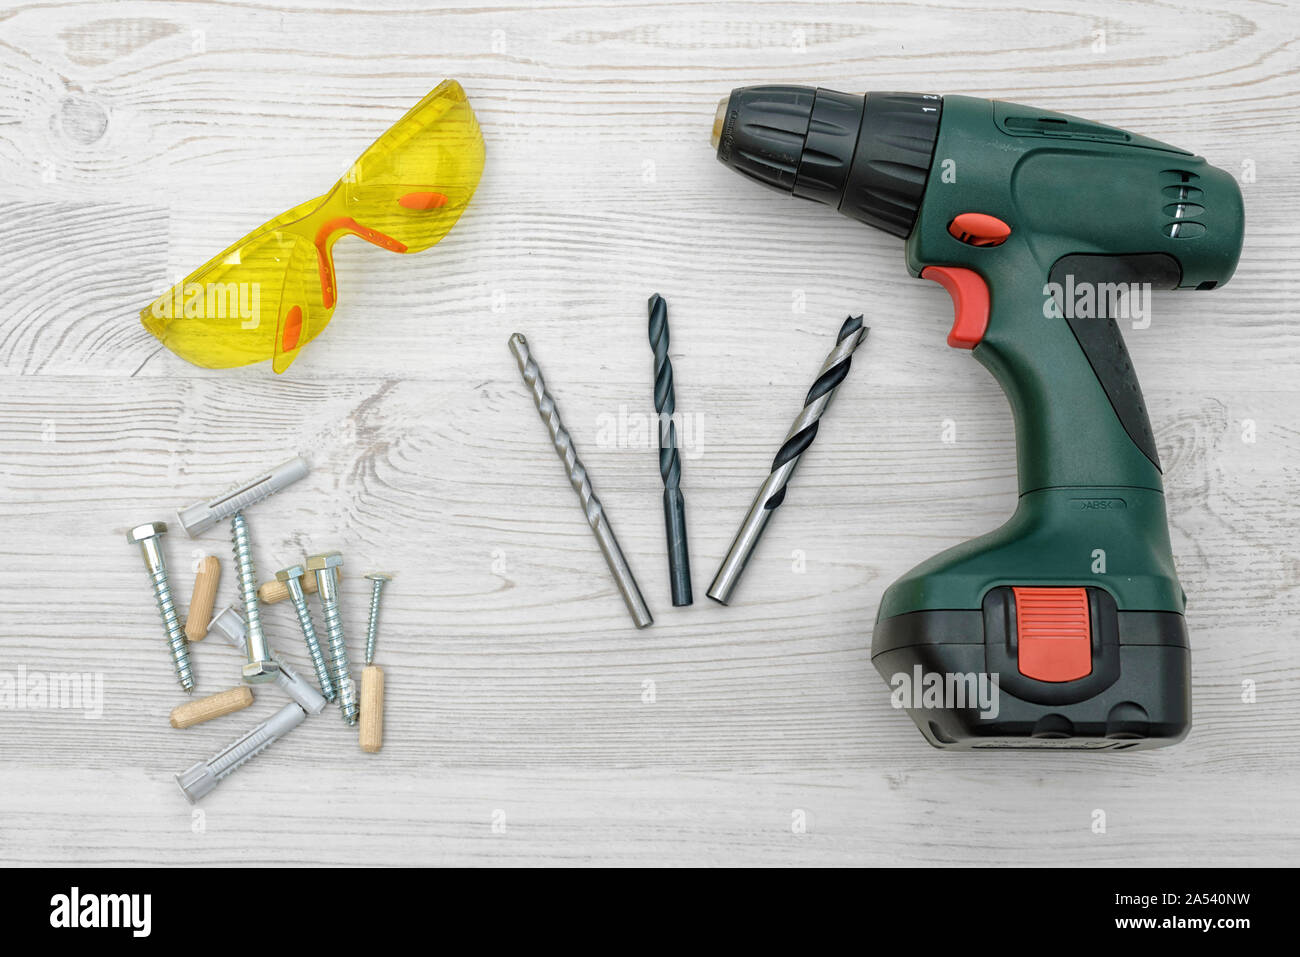 https://c8.alamy.com/comp/2A540NW/a-cordless-drill-set-on-a-wooden-table-background-with-a-set-of-bits-in-the-box-and-yellow-protective-glasses-around-2A540NW.jpg